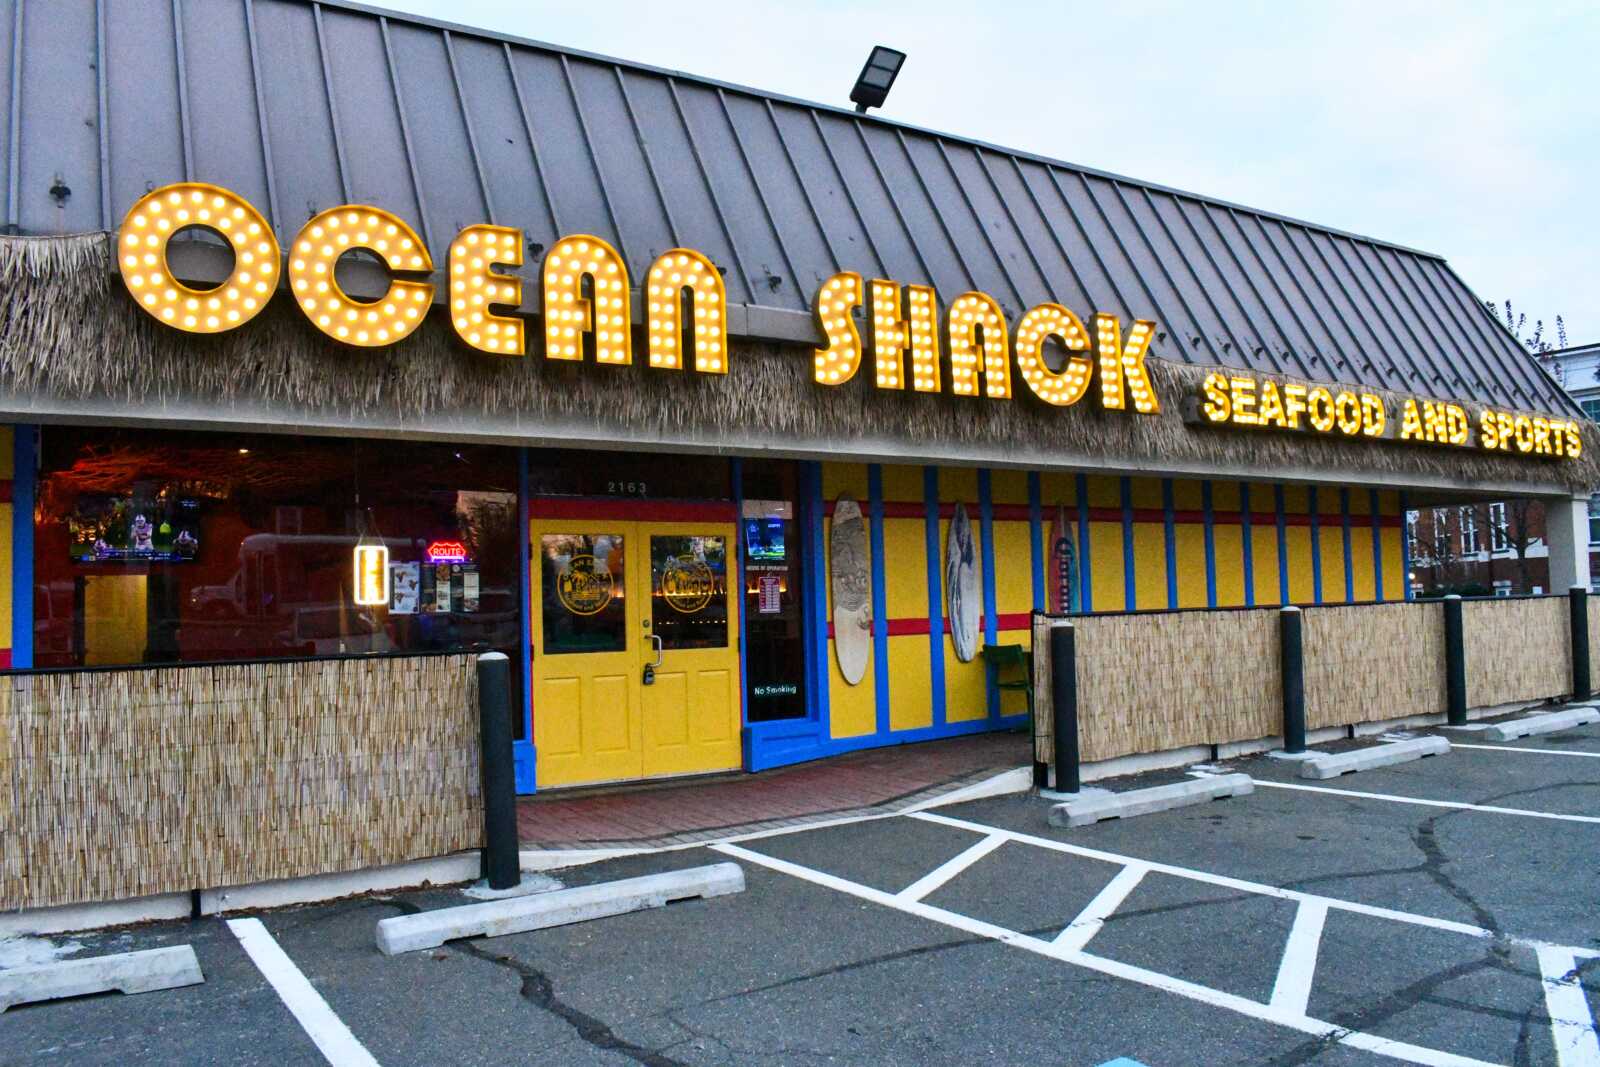 Come dine and watch sports at Ocean Shack in the Glebe Road Shopping Center